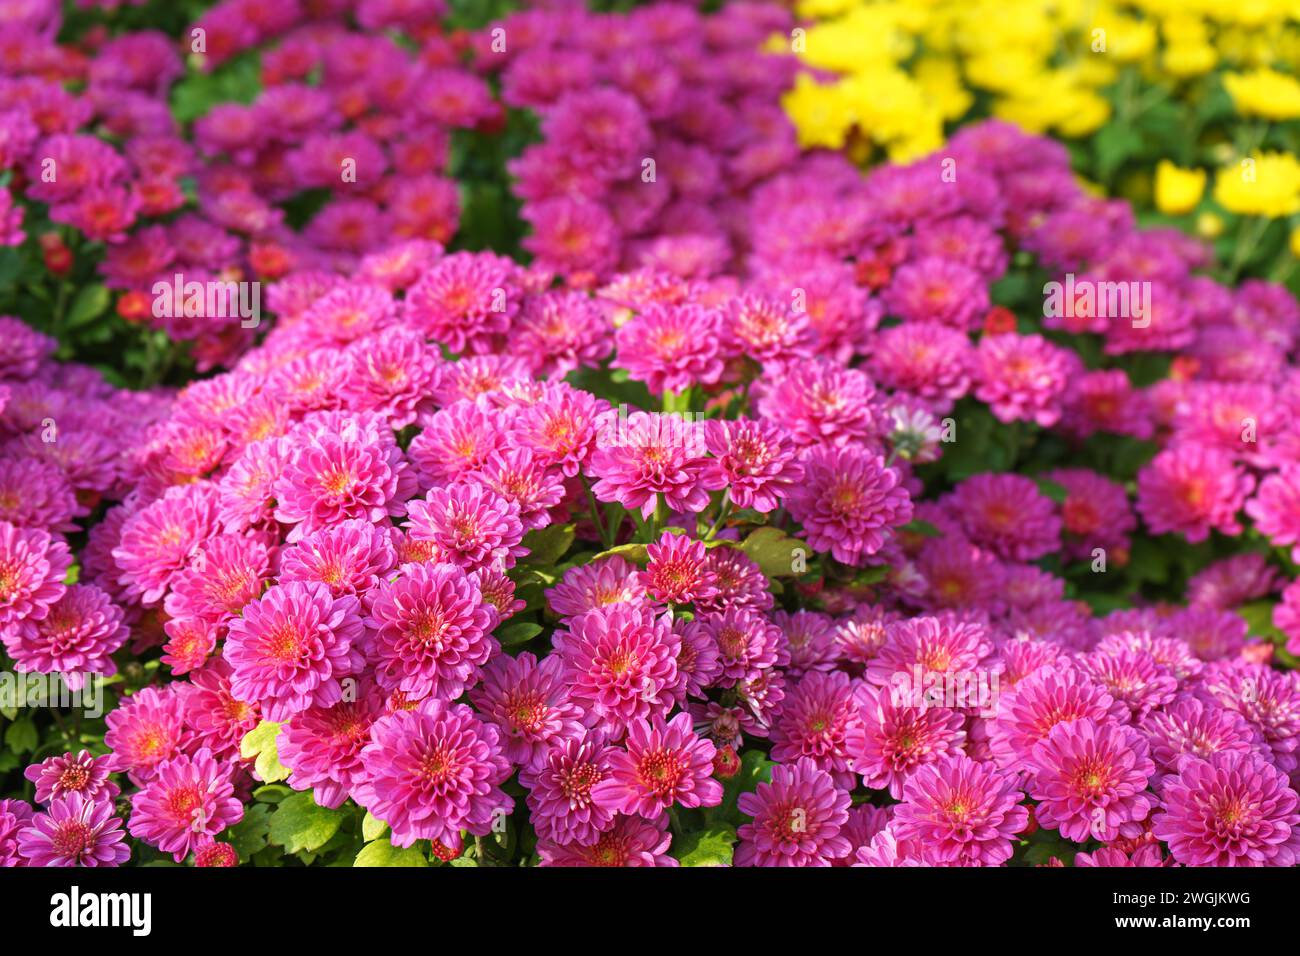 Fresh bright blooming pink korean garden chrysanthemums bushes Cherry lace in autumn garden outside in sunny day. Flower background for greeting card, Stock Photo